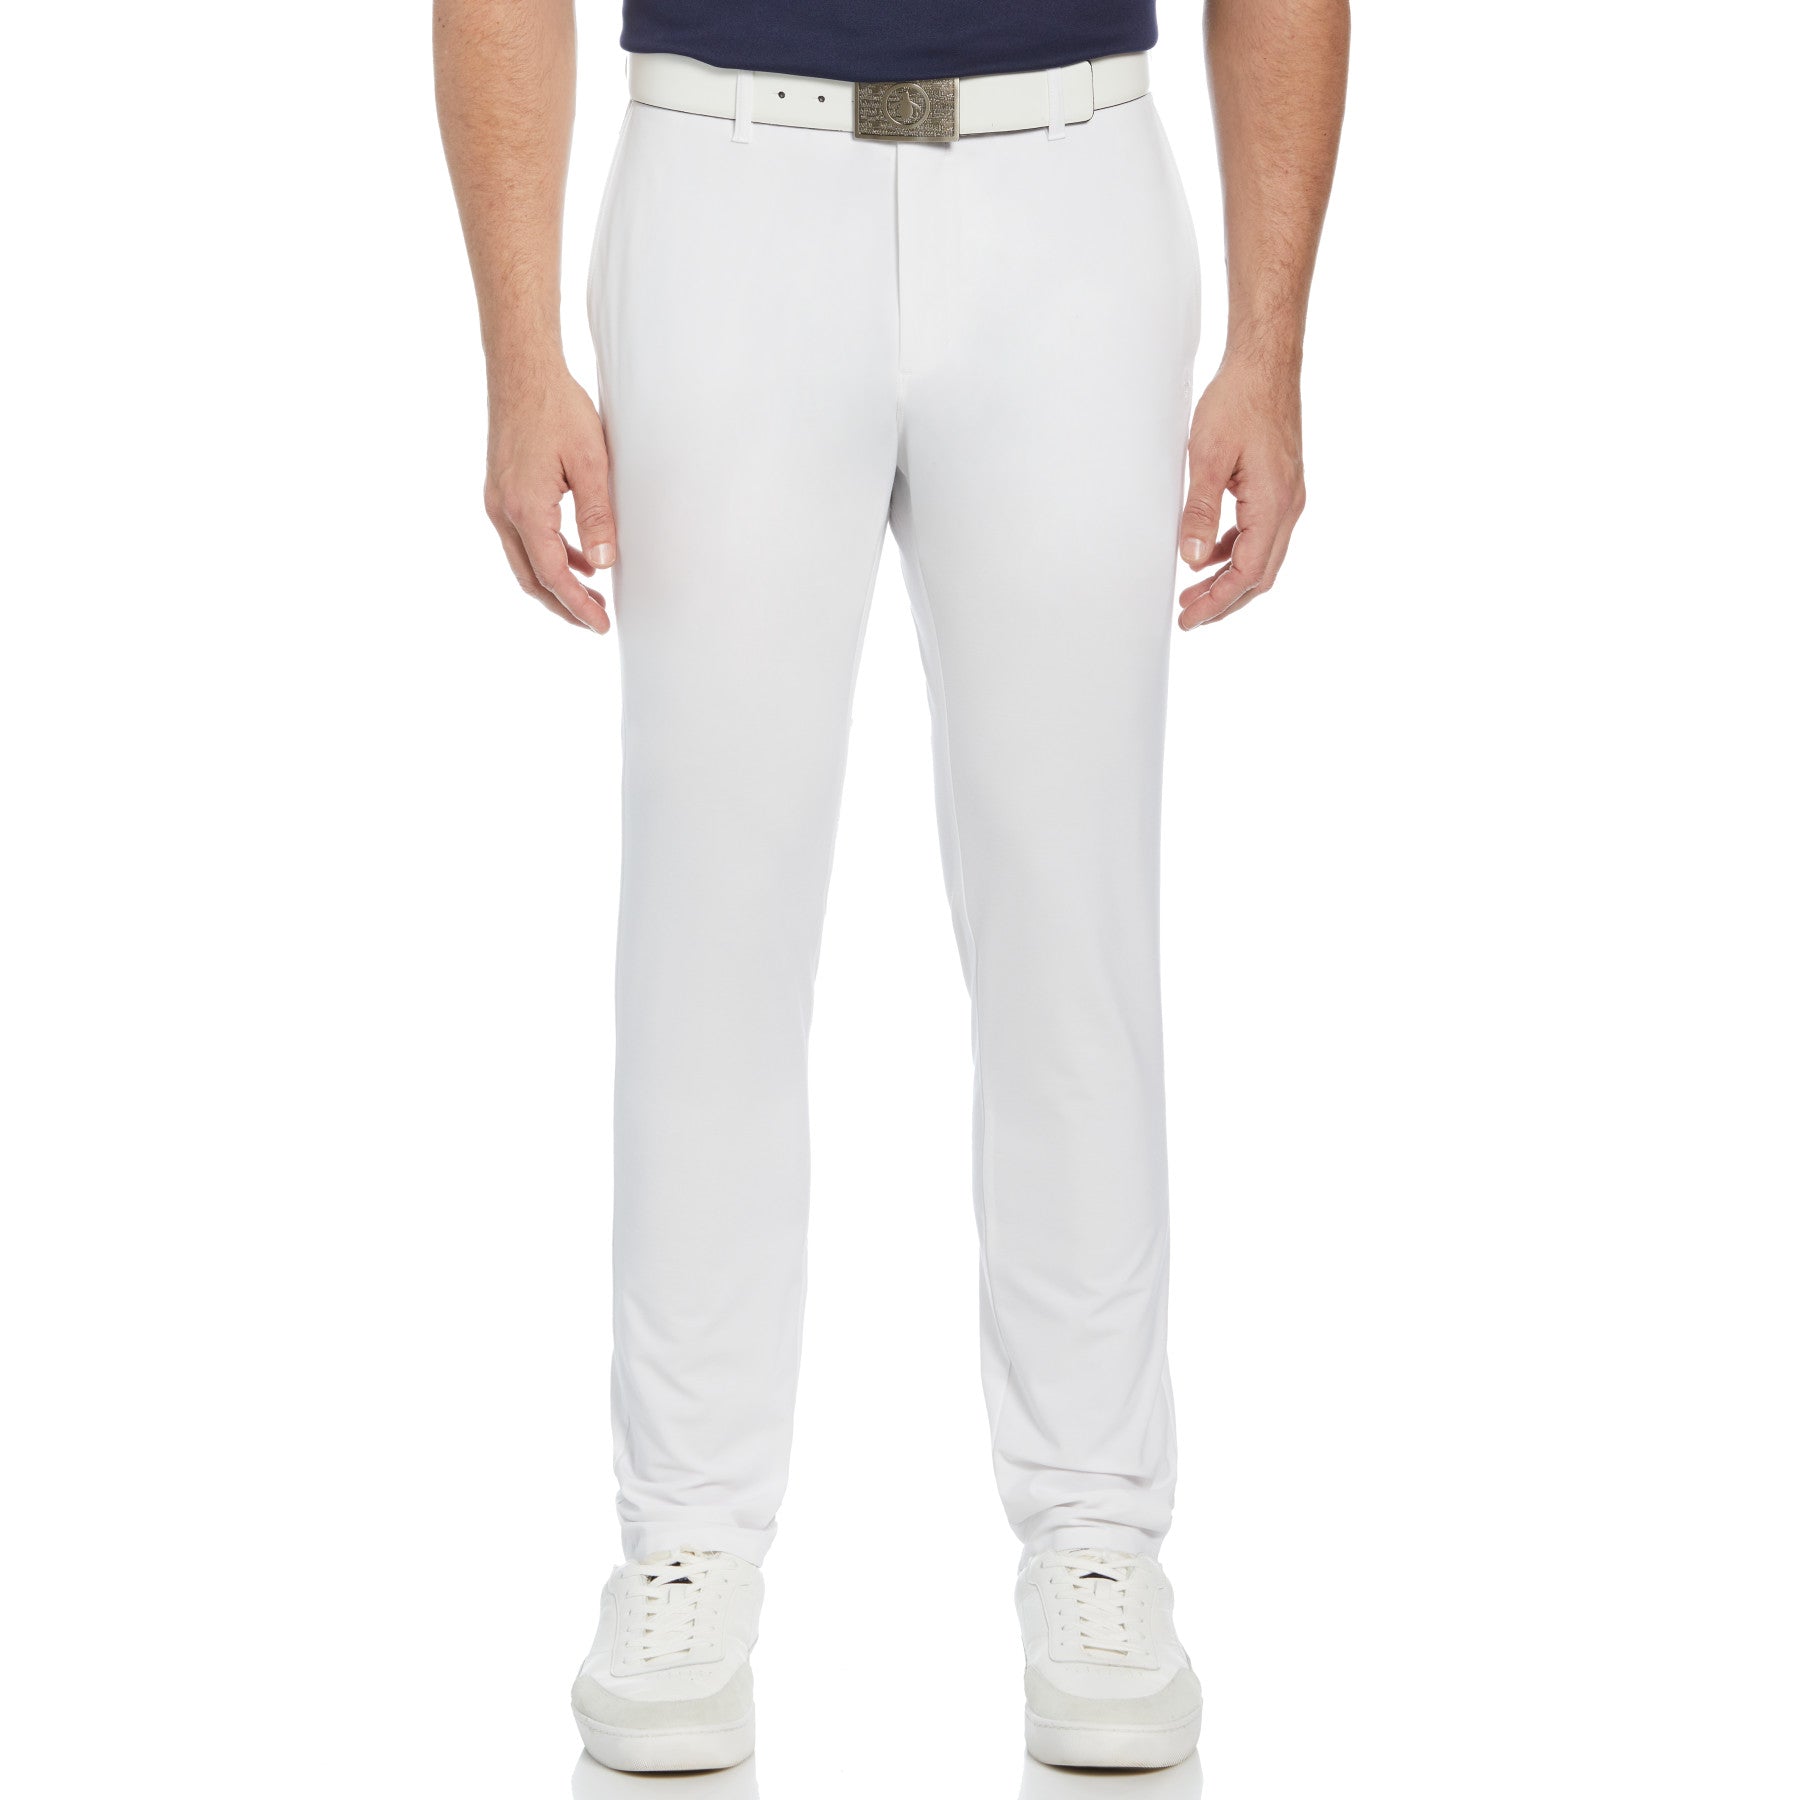 View Performance Golf Trousers In Bright White information